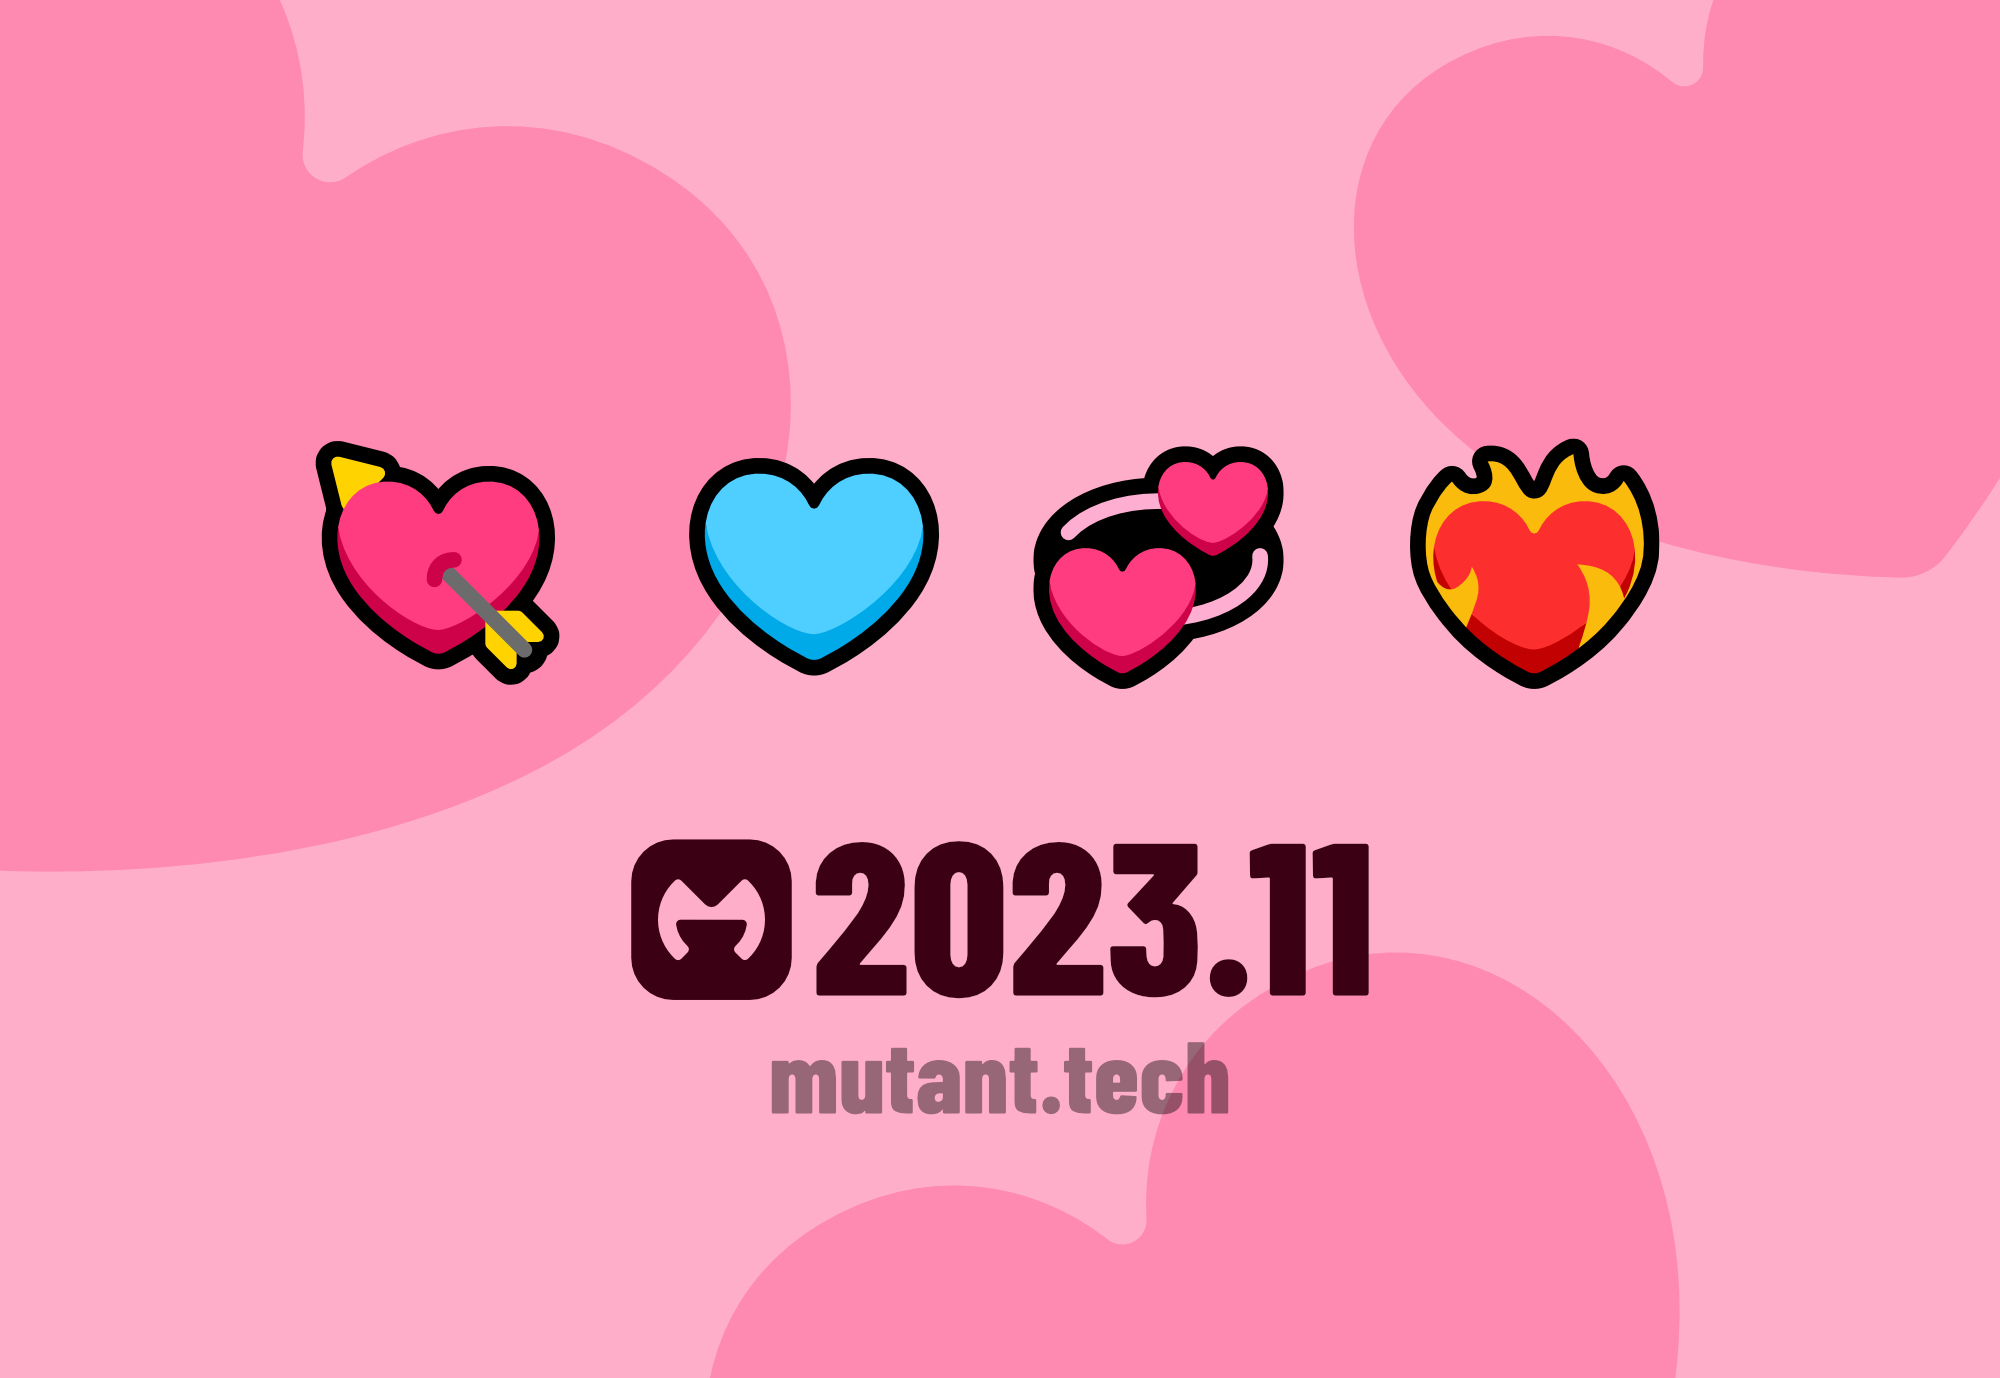 A collection of heart emojis with different designs against a pink background with large heart shapes. The emojis include a heart with an arrow, a plain blue heart, a pair of pink hearts, and a heart on fire. Below the emojis, there is a logo of a stylised 'M' with "2023.11" and a web address "mutant.tech".